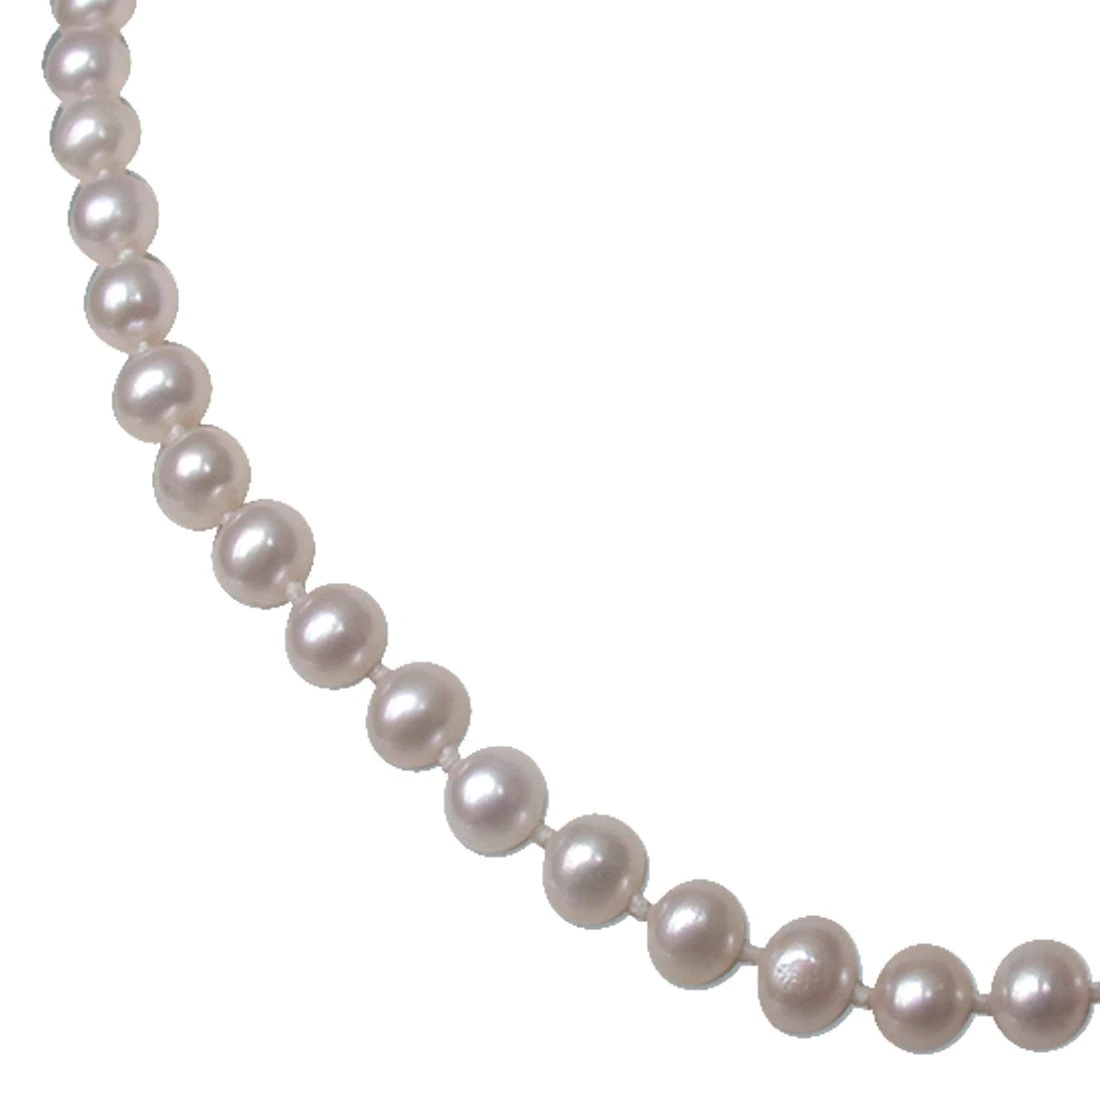 Luxuriate - Single Line Round Real Freshwater Pearl Necklace with Knots for Women (SN11)